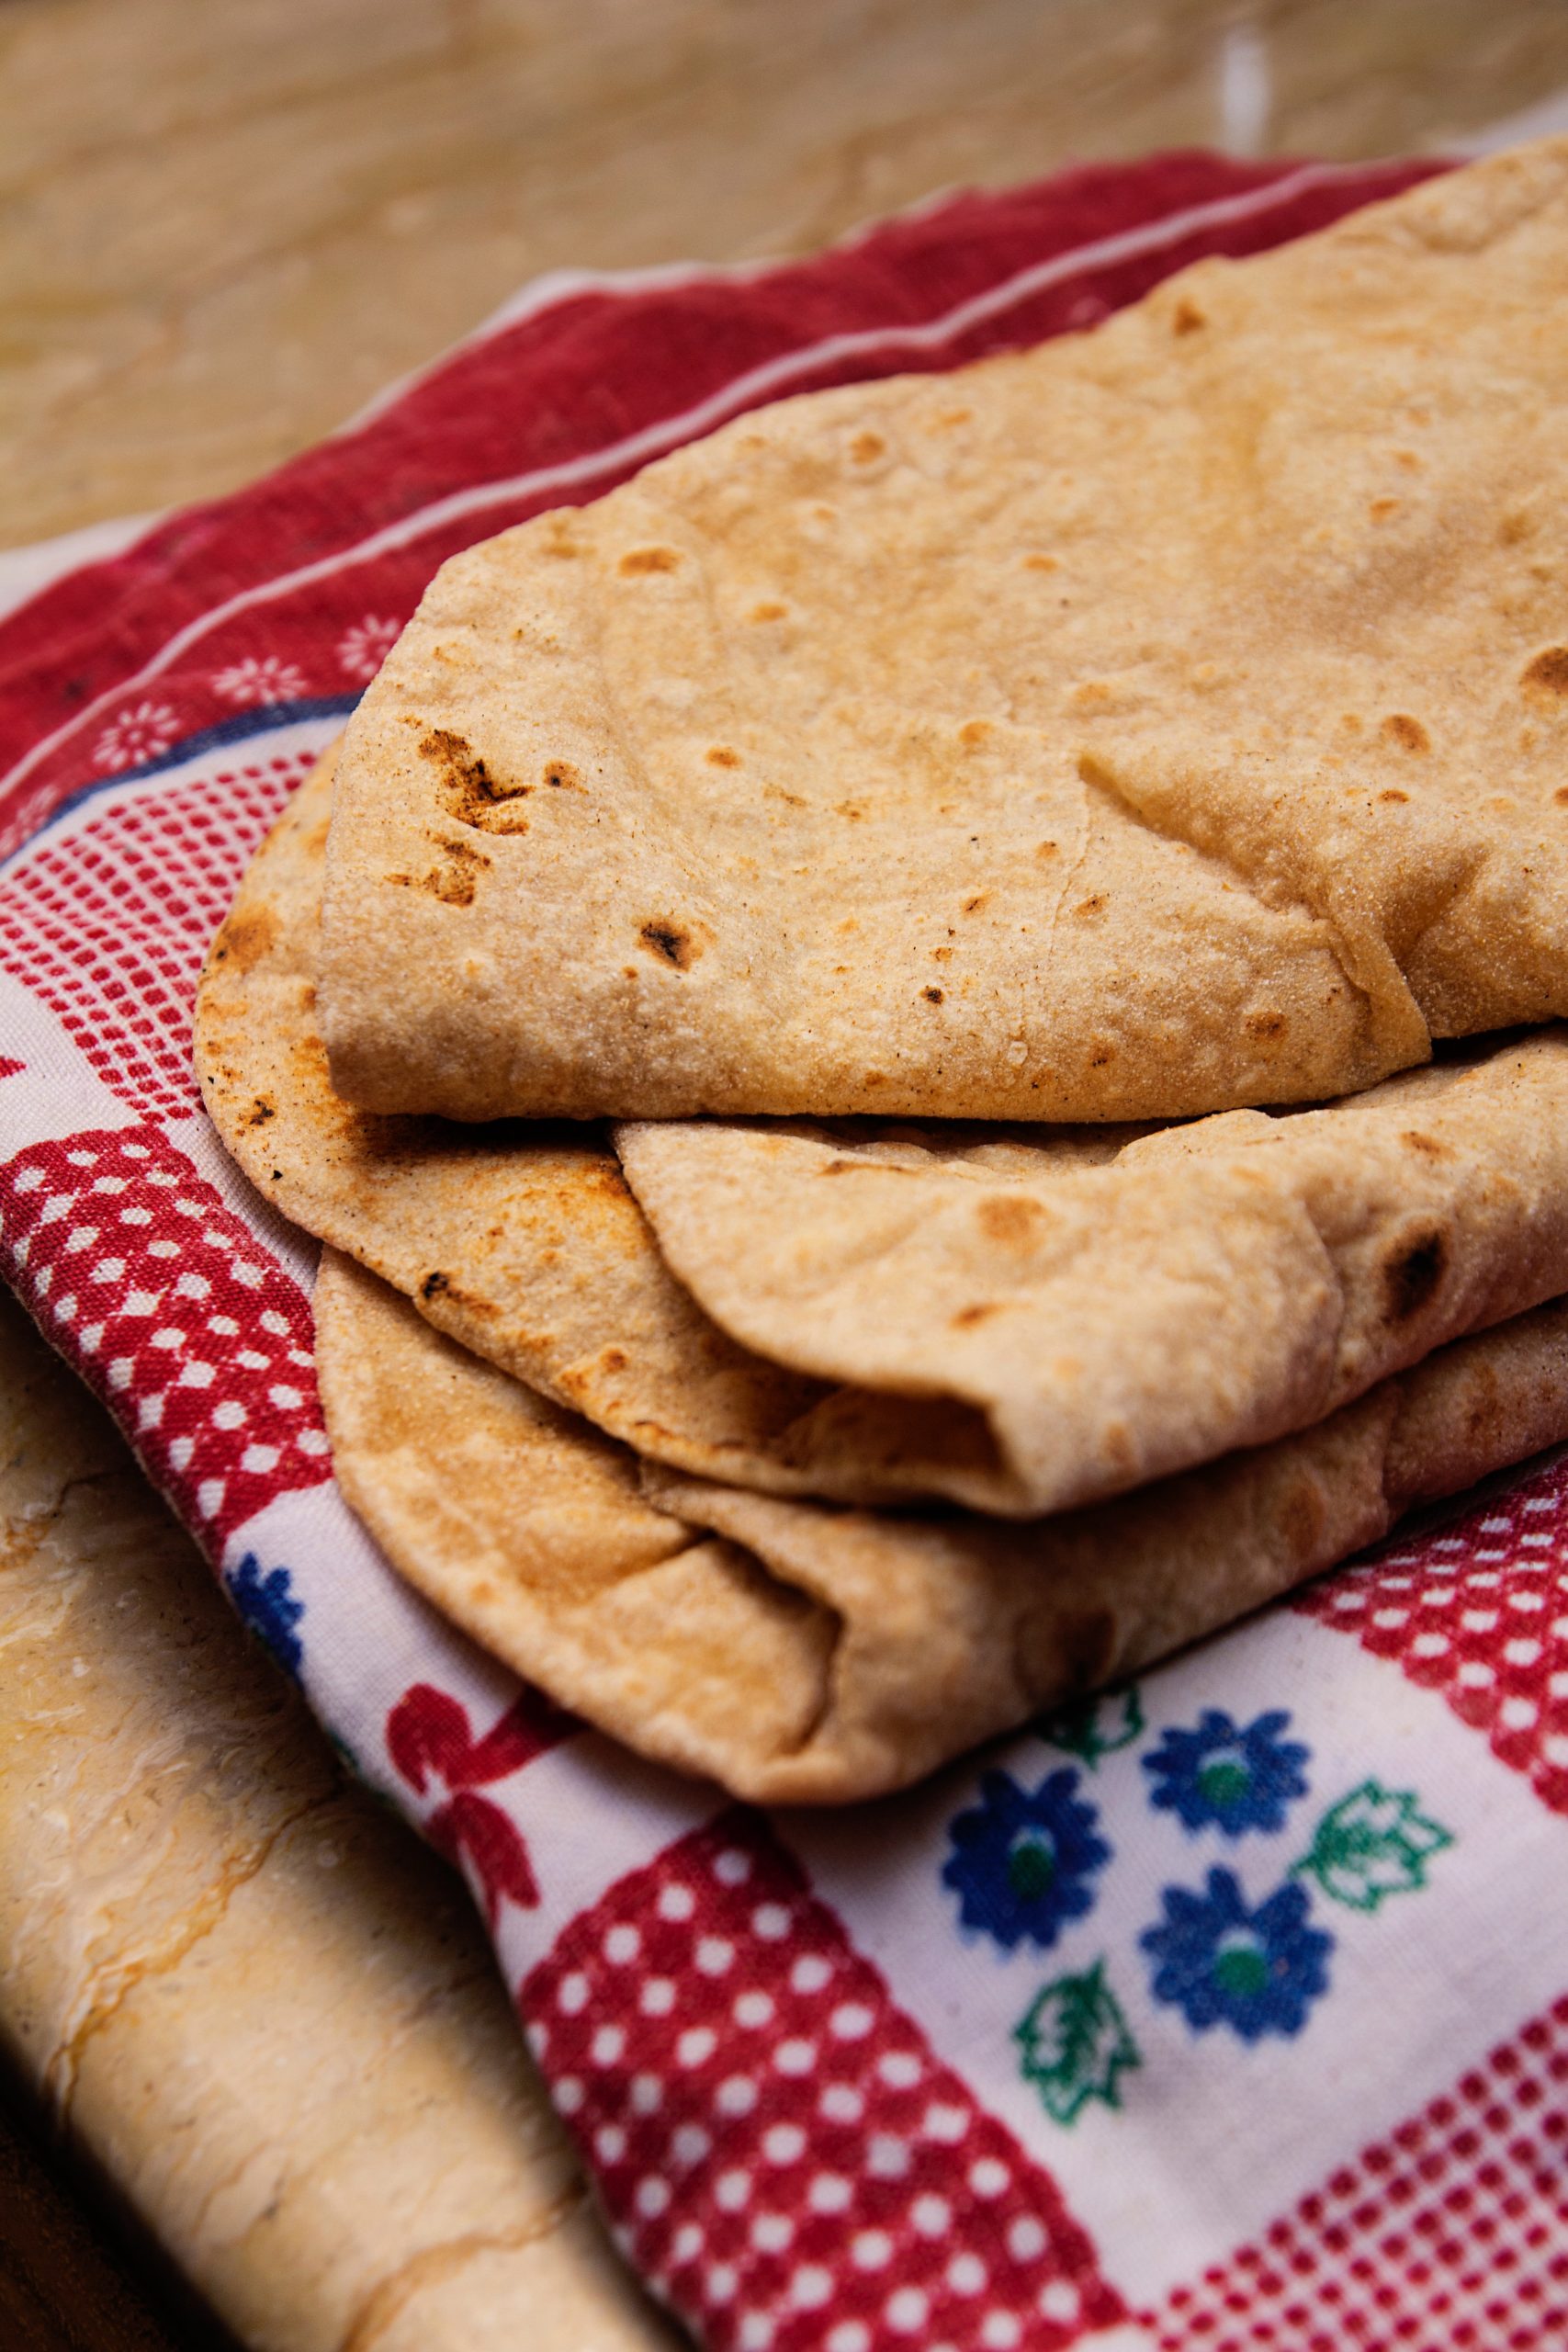 Roti as a Metaphor for an Embodied Ministry